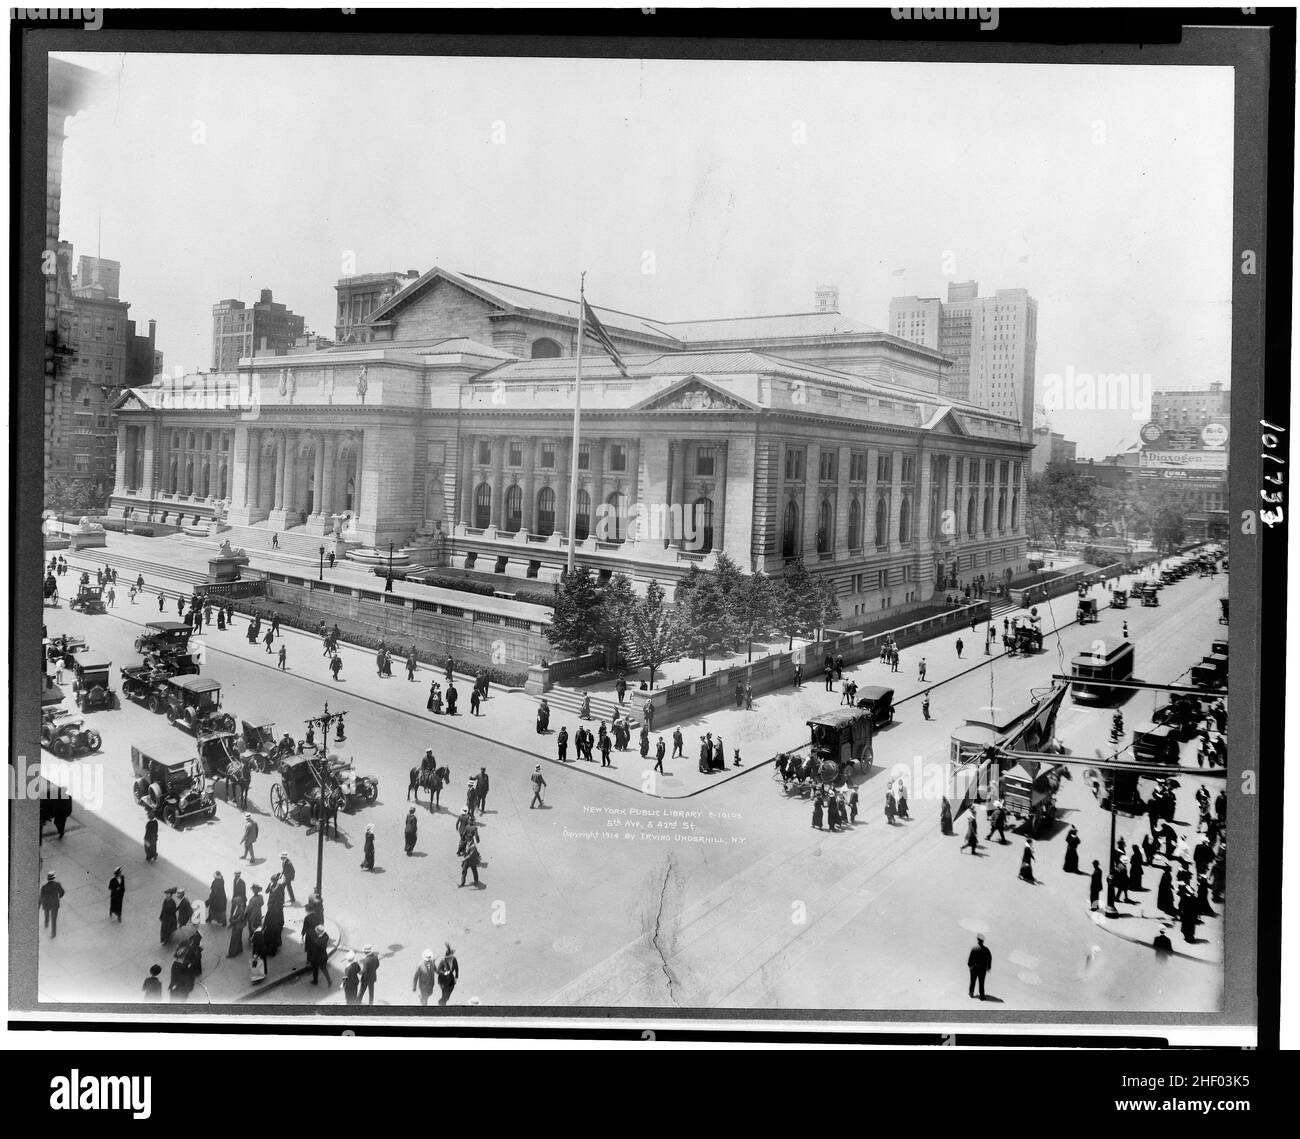 New York Public Library - Photo by Irving Underhill, c 1914. Vintage New York photo. Stock Photo